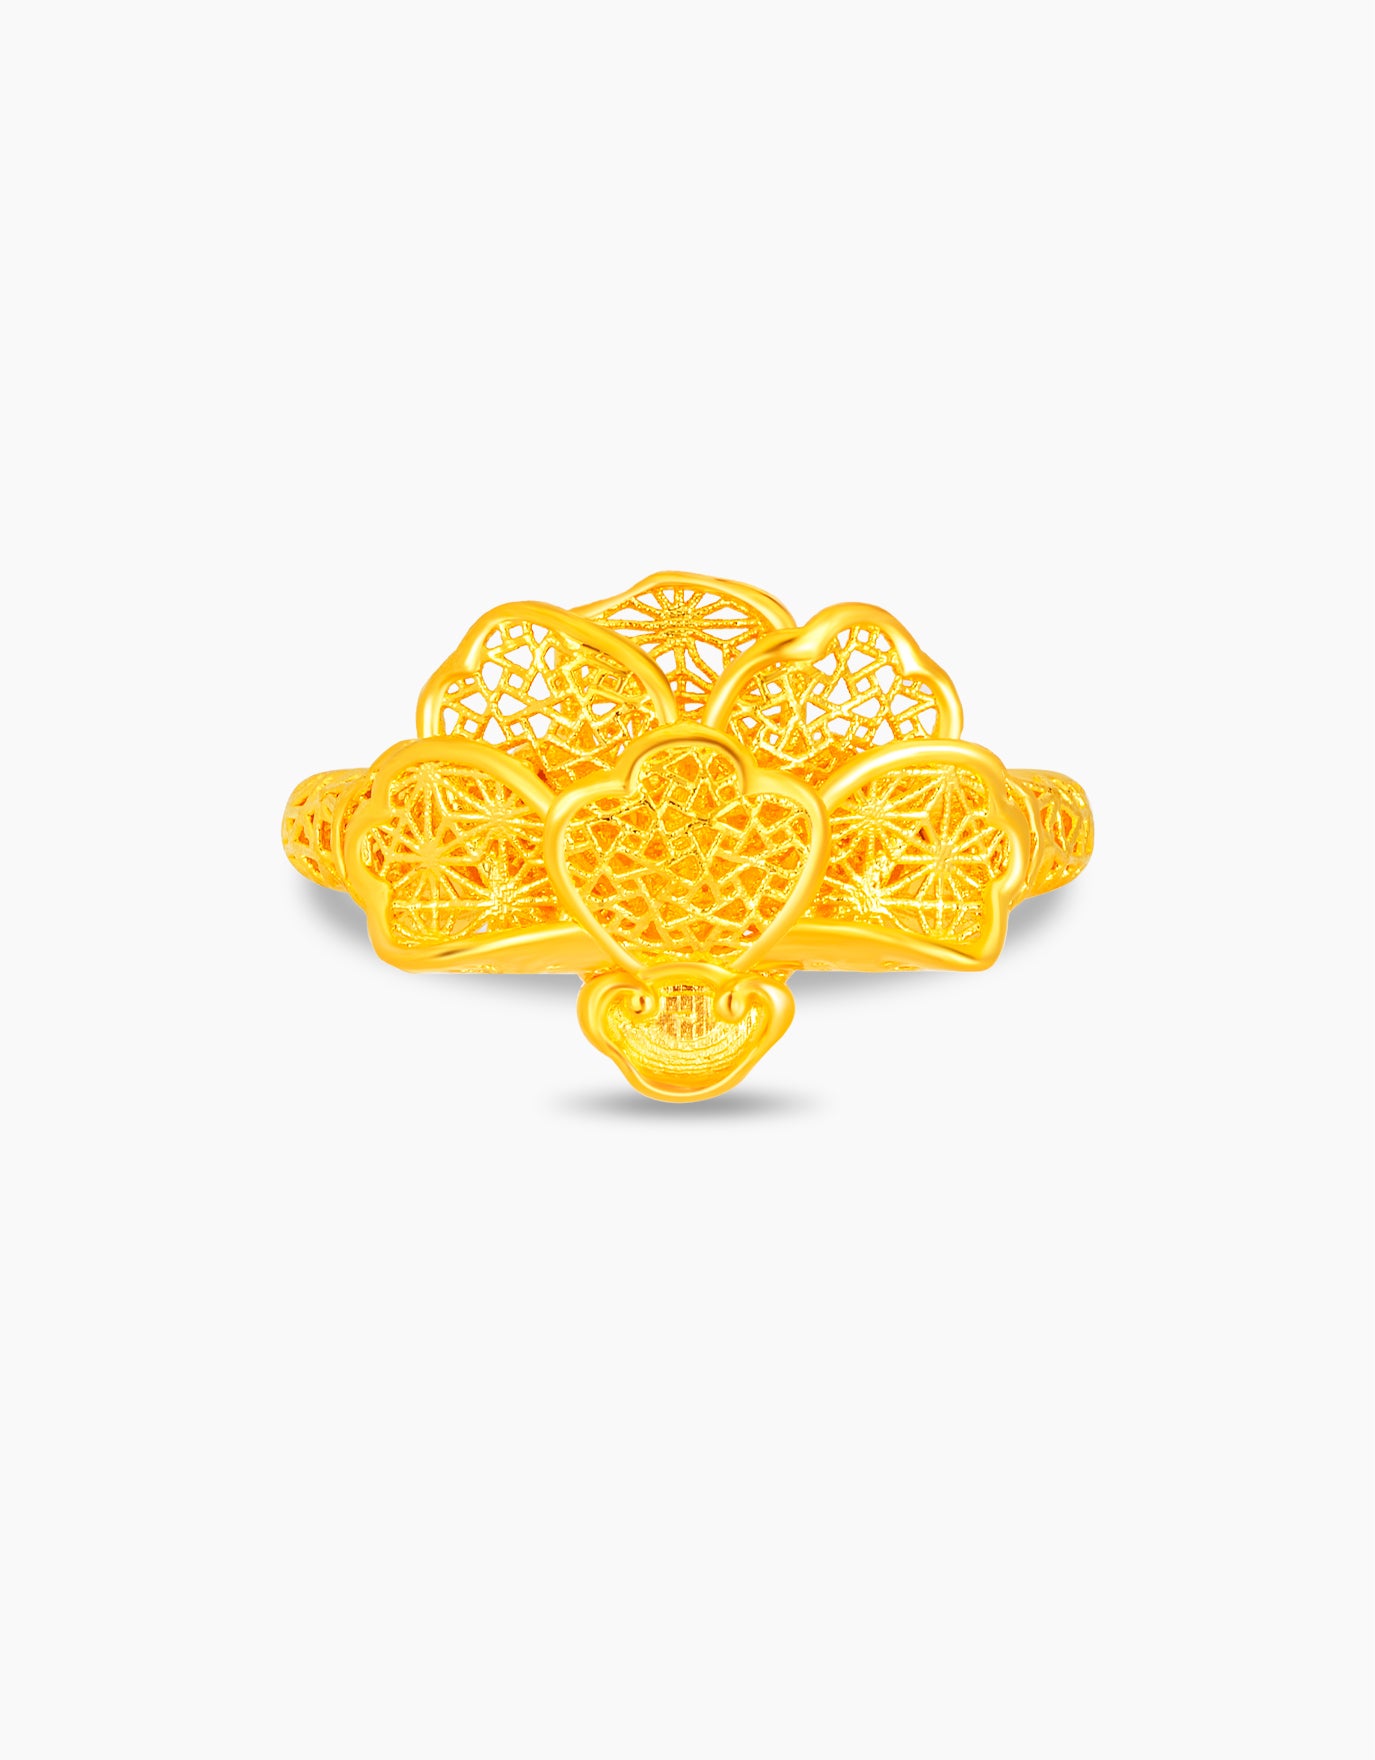 LVC 9IN Ginkgo 999 Gold Ring